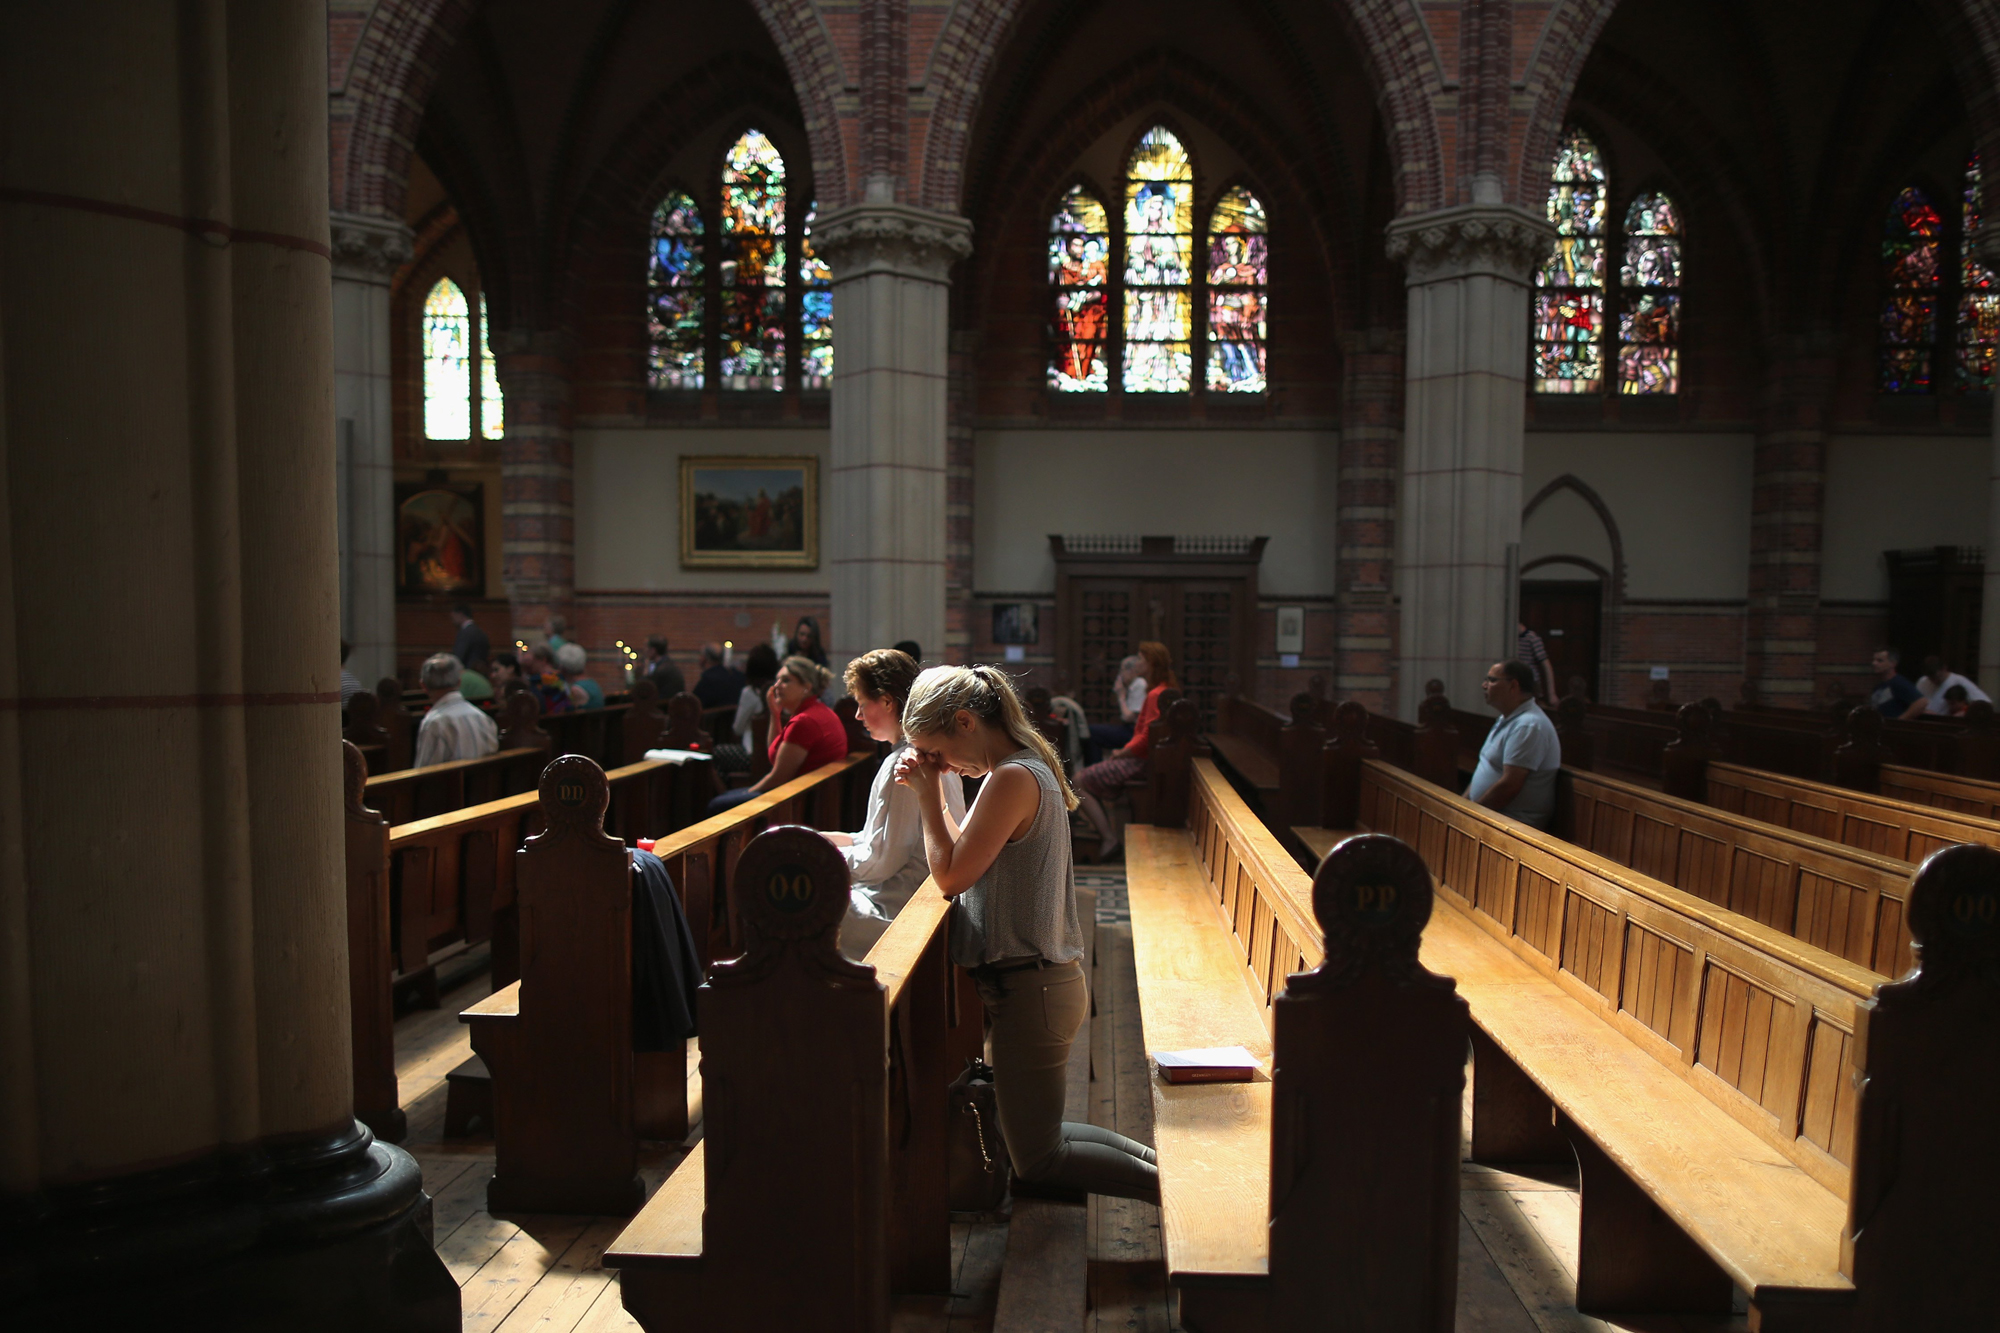 Local people pray during a special mass in Saint Vitus Church in memory of the victims of Malaysia Airlines flight MH17 on July 20, 2014 in Hilversum, Netherlands. (Christopher Furlong—Getty Images)